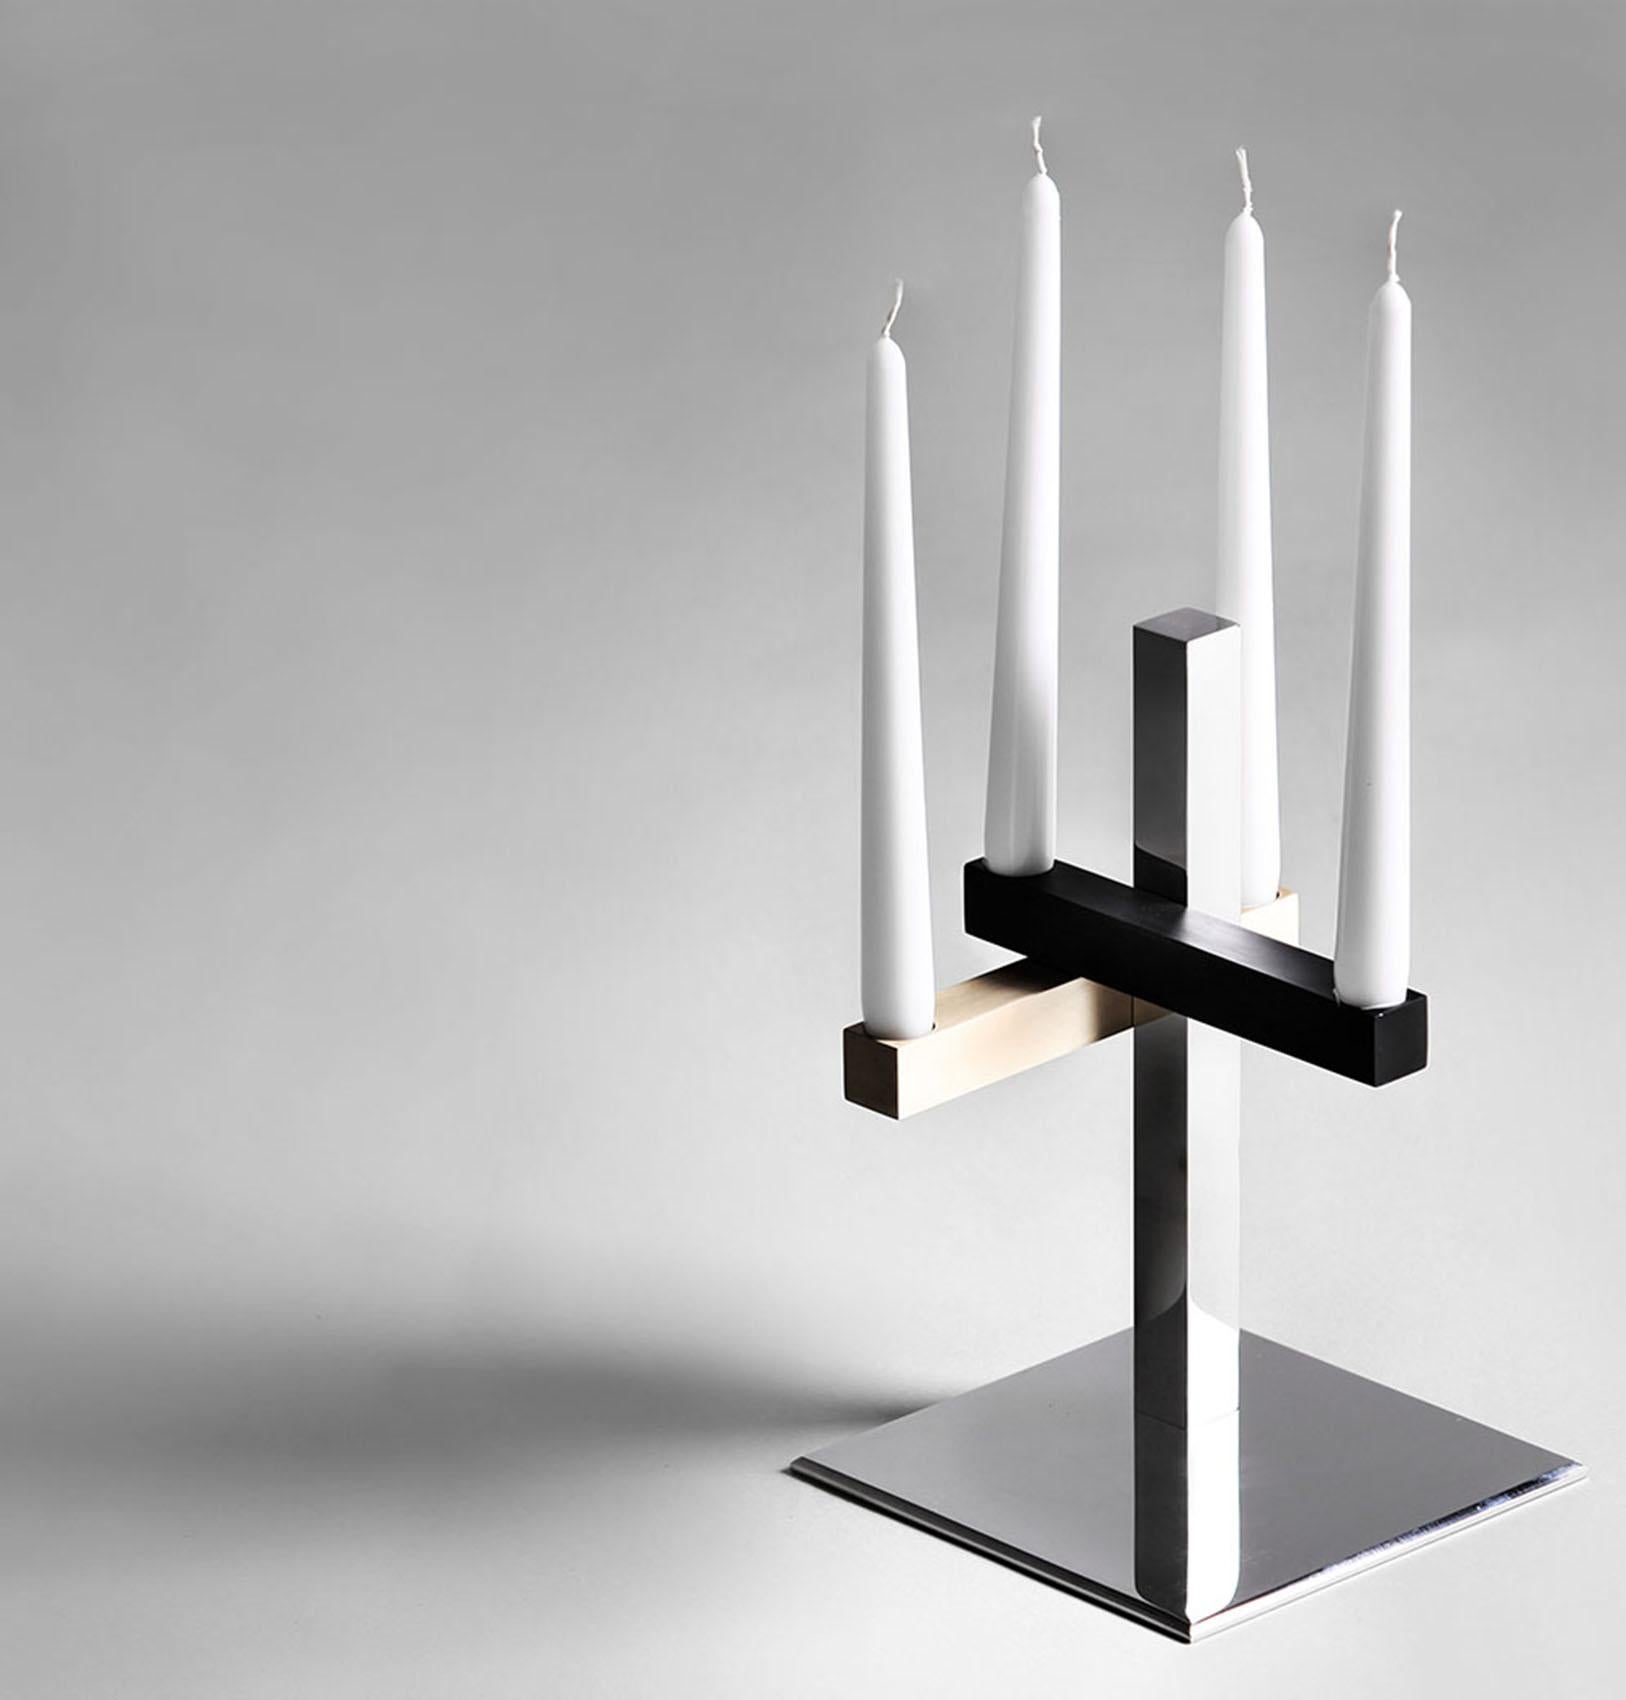 In a simple way, this candle holder is the smallest design of the Mikado line.
It is made of polished stainless steel, gun metal, brushed light oxidized brass base.